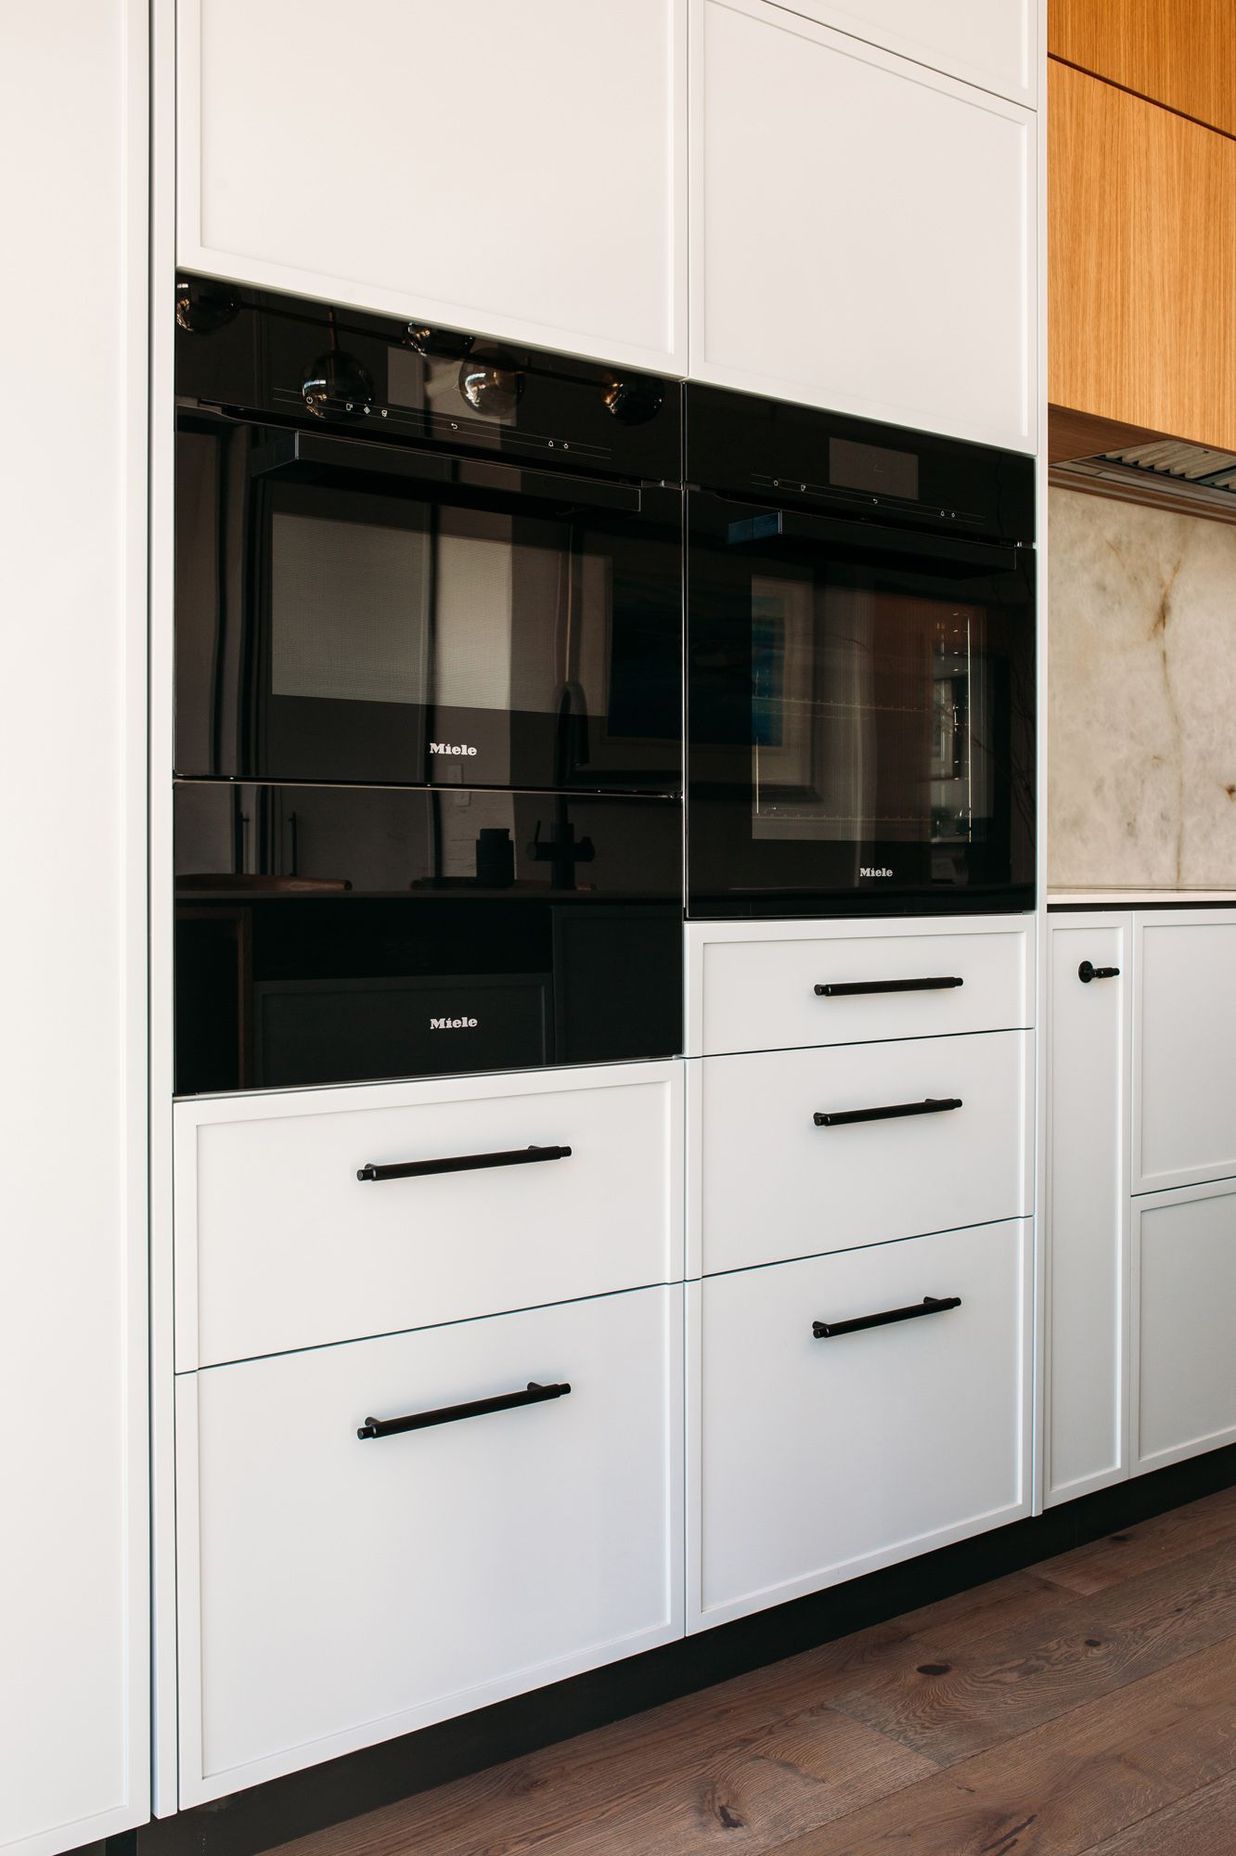 Careful planning of the kitchen cabinetry has resulted in a contemporary shaker style look.